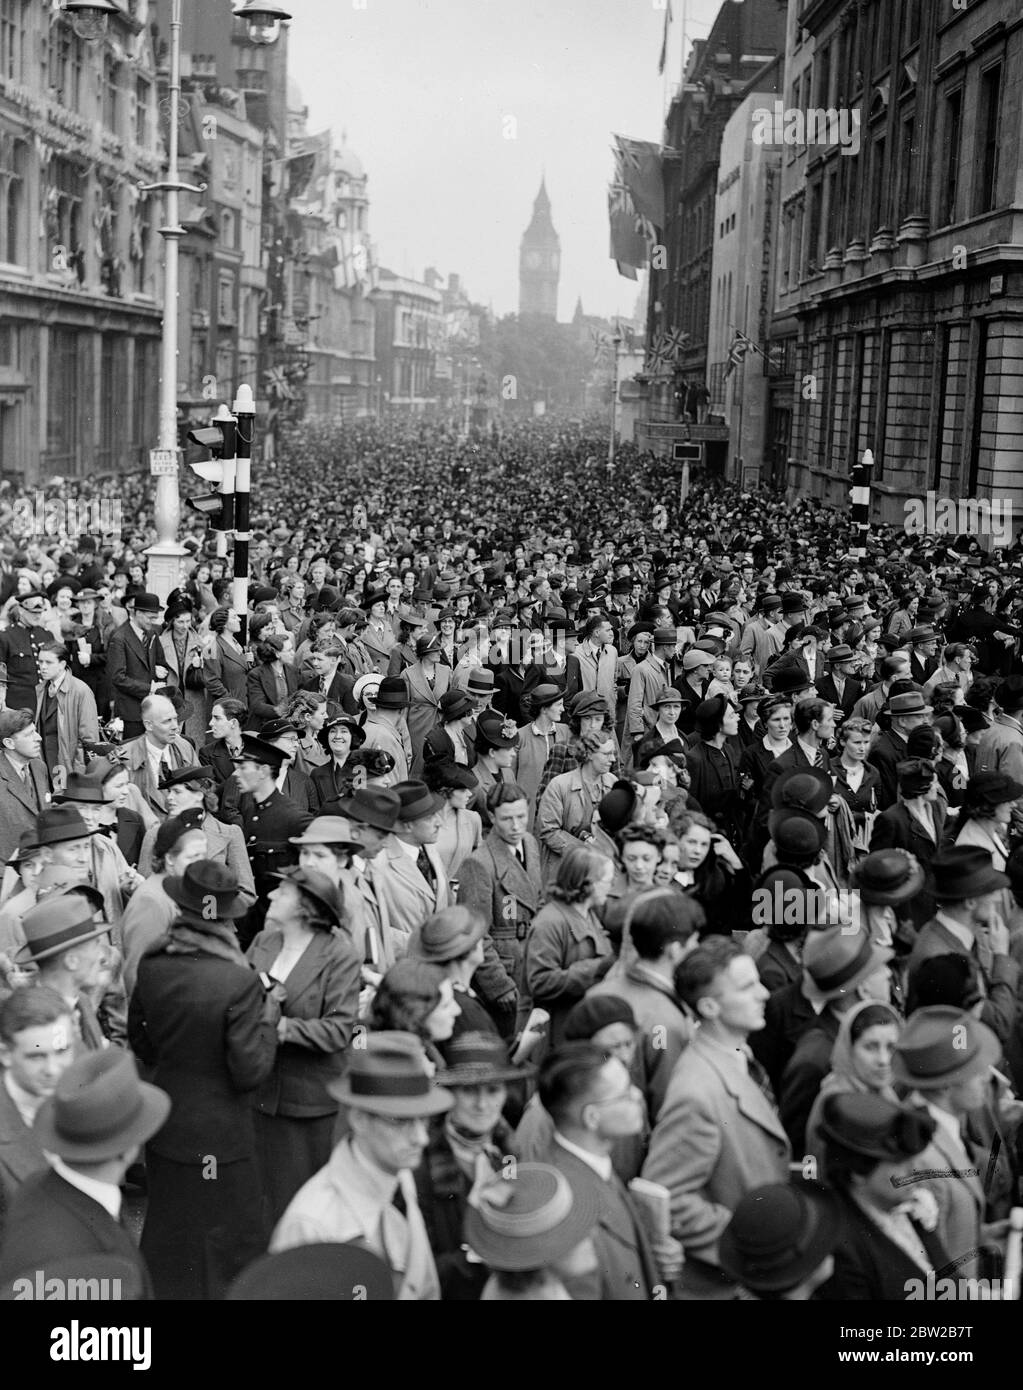 The Royal tour of Canada and the USA by King George VI and Queen Elizabeth , 1939 Crowds in Whitehall , London , waiting to see the King and Queen on their return to Britain . Stock Photo